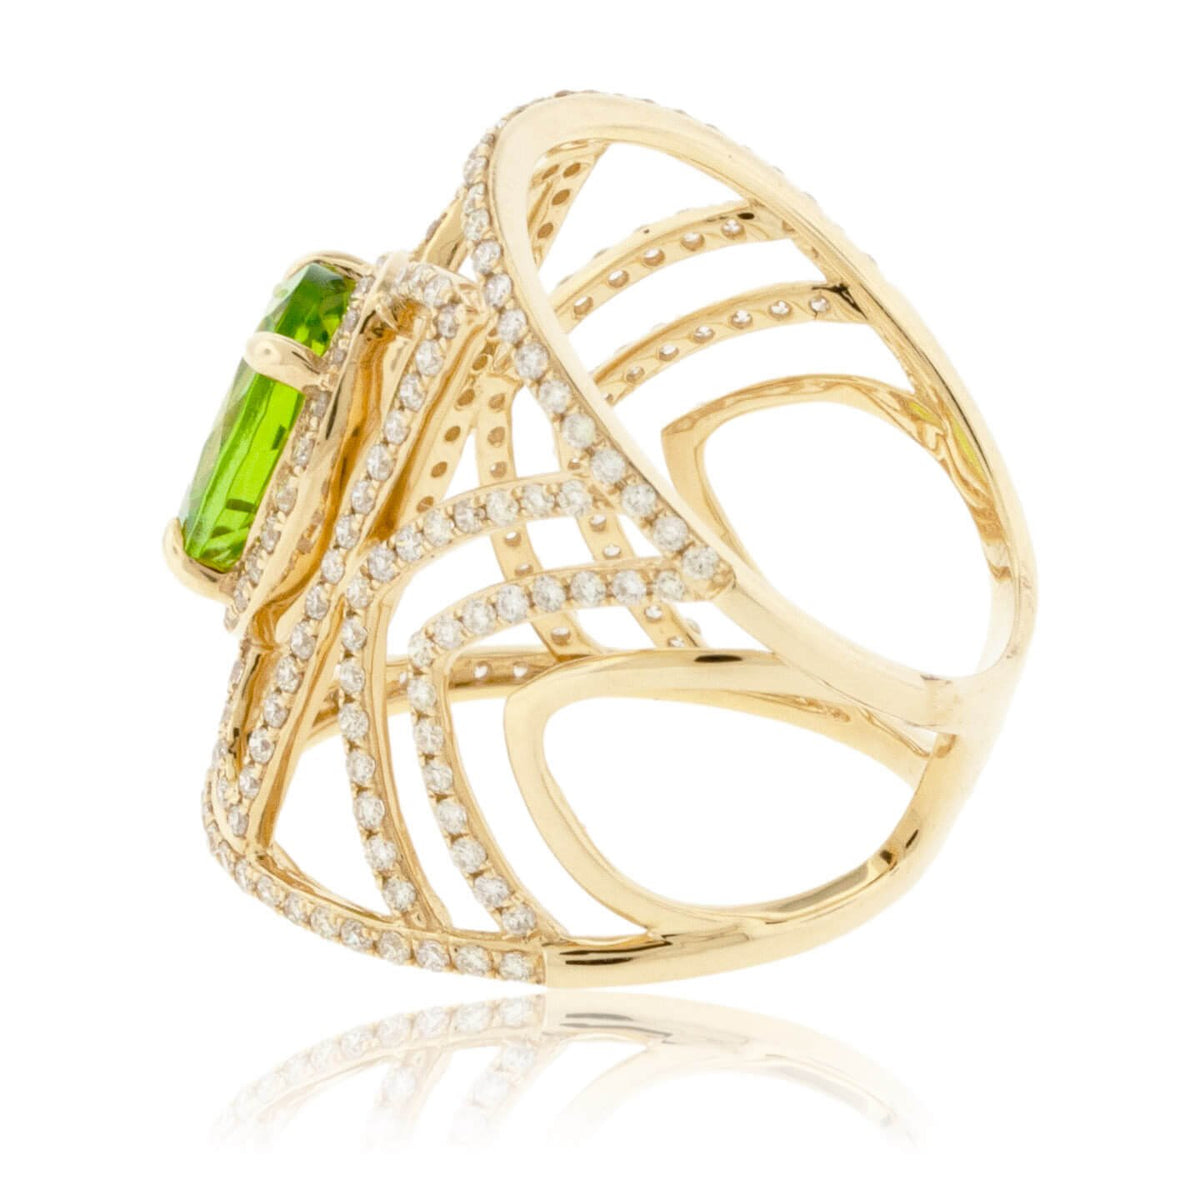 Oval Peridot & Wide Vintage Inspired Diamond Ring - Park City Jewelers